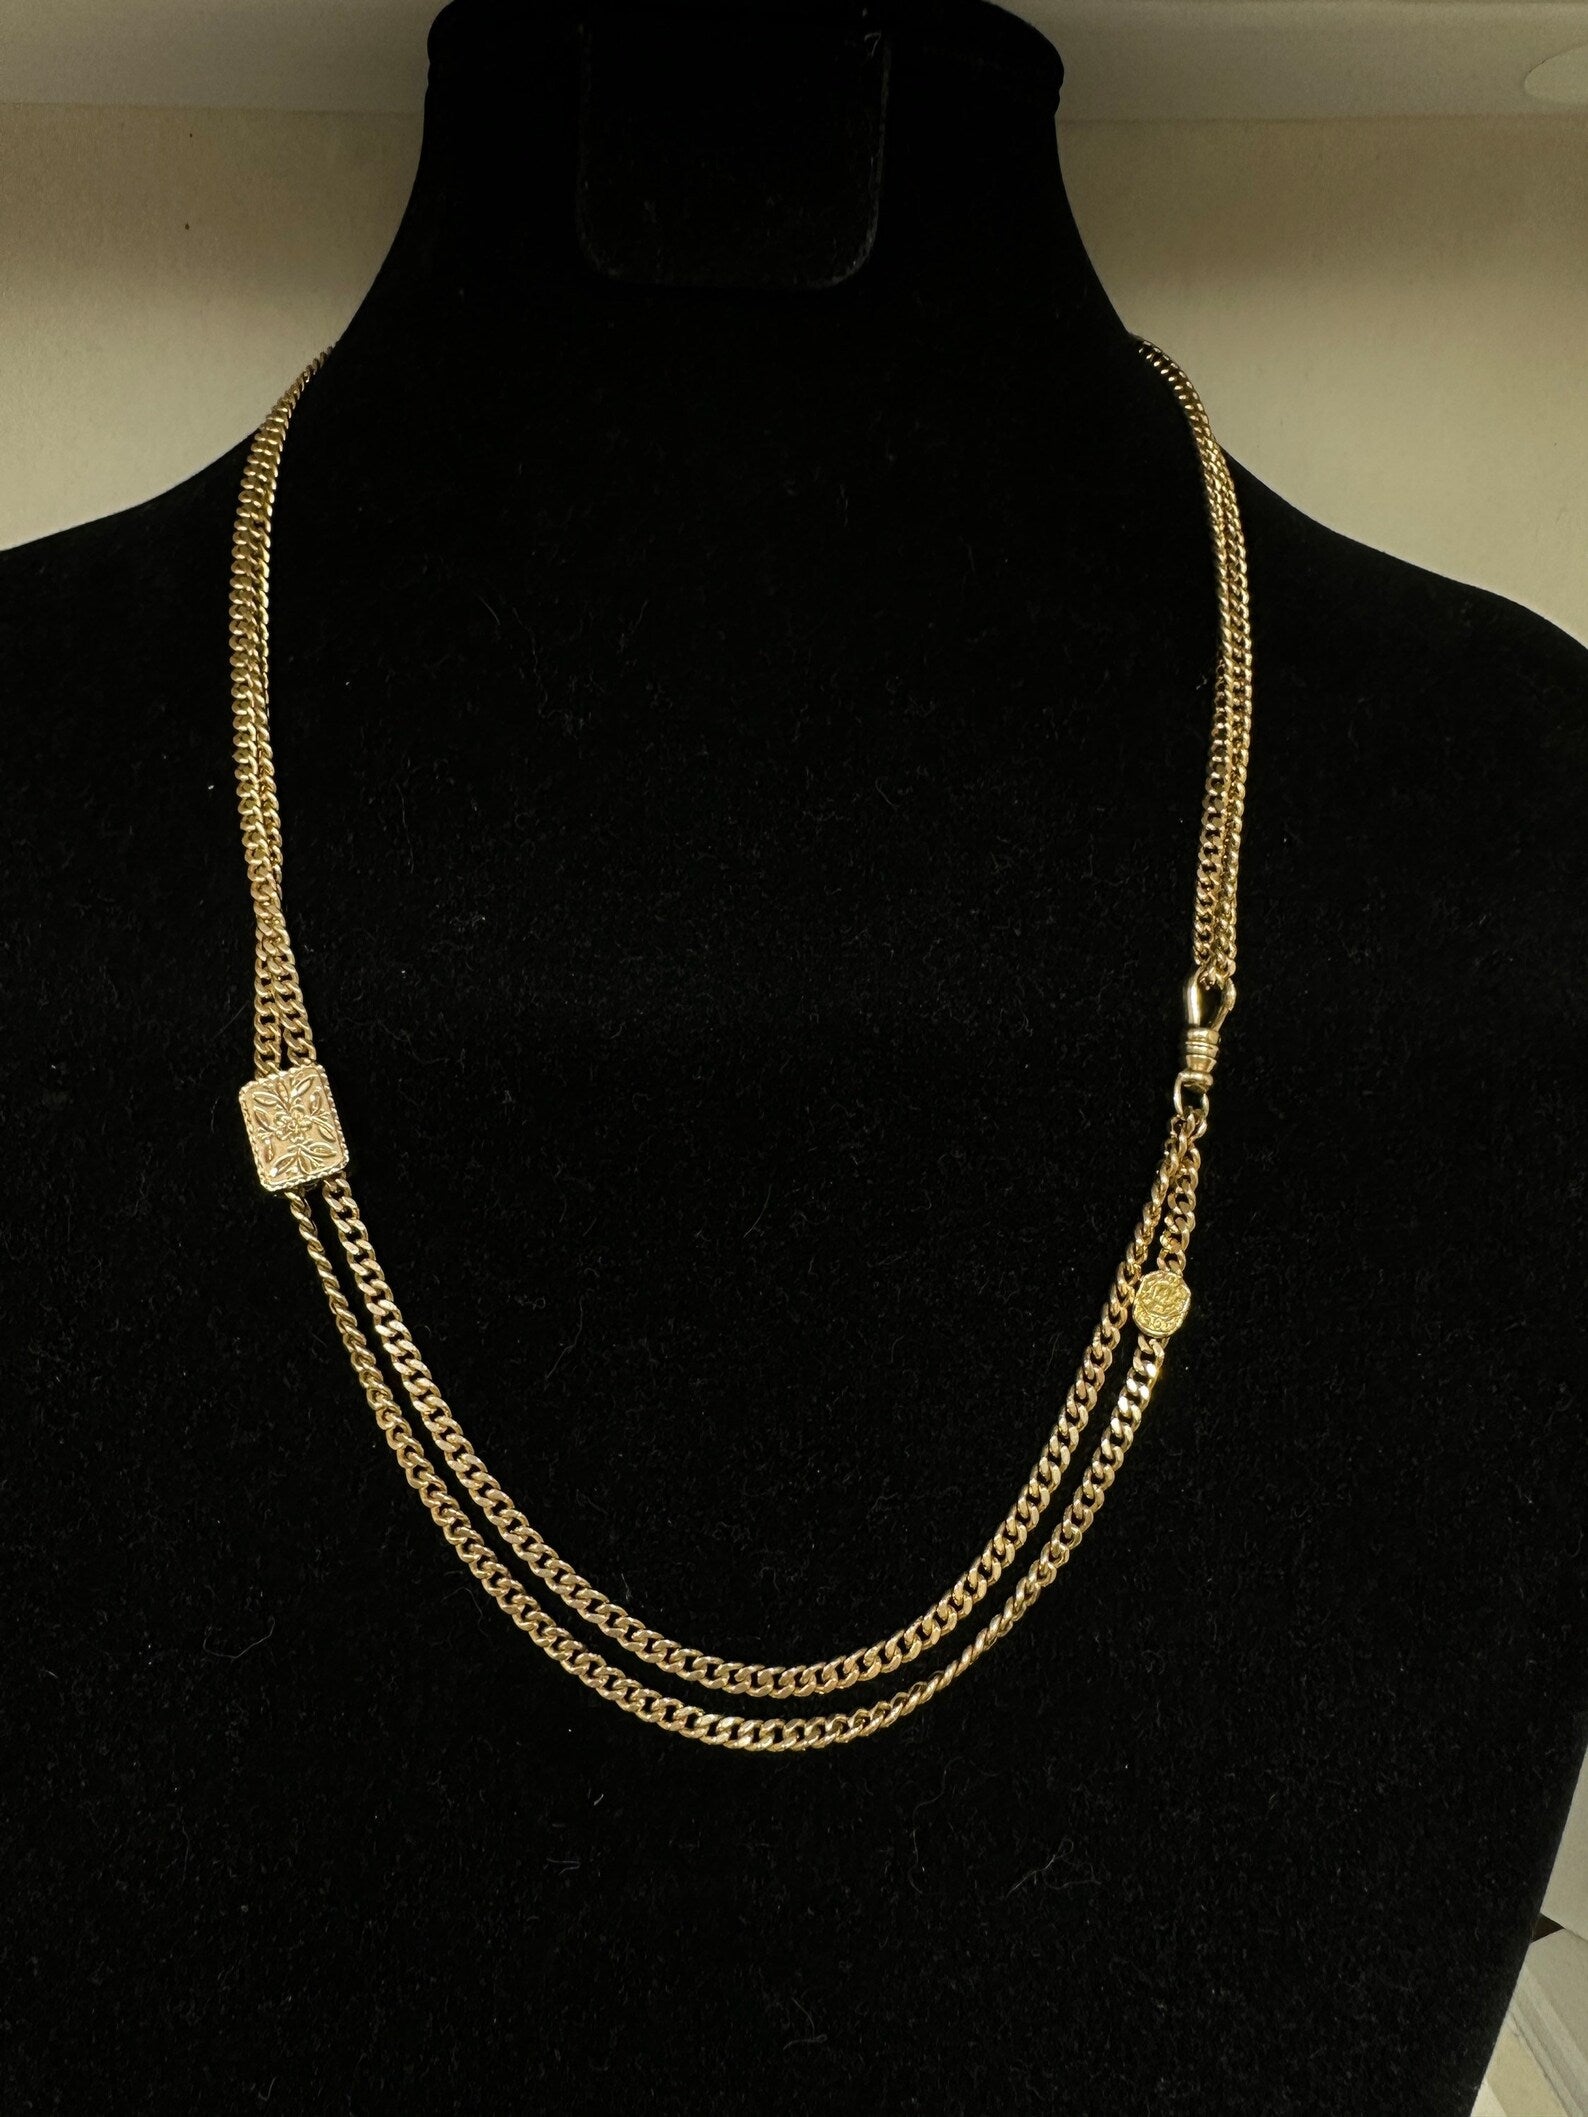 Ornate Engraved Chain Link Necklace